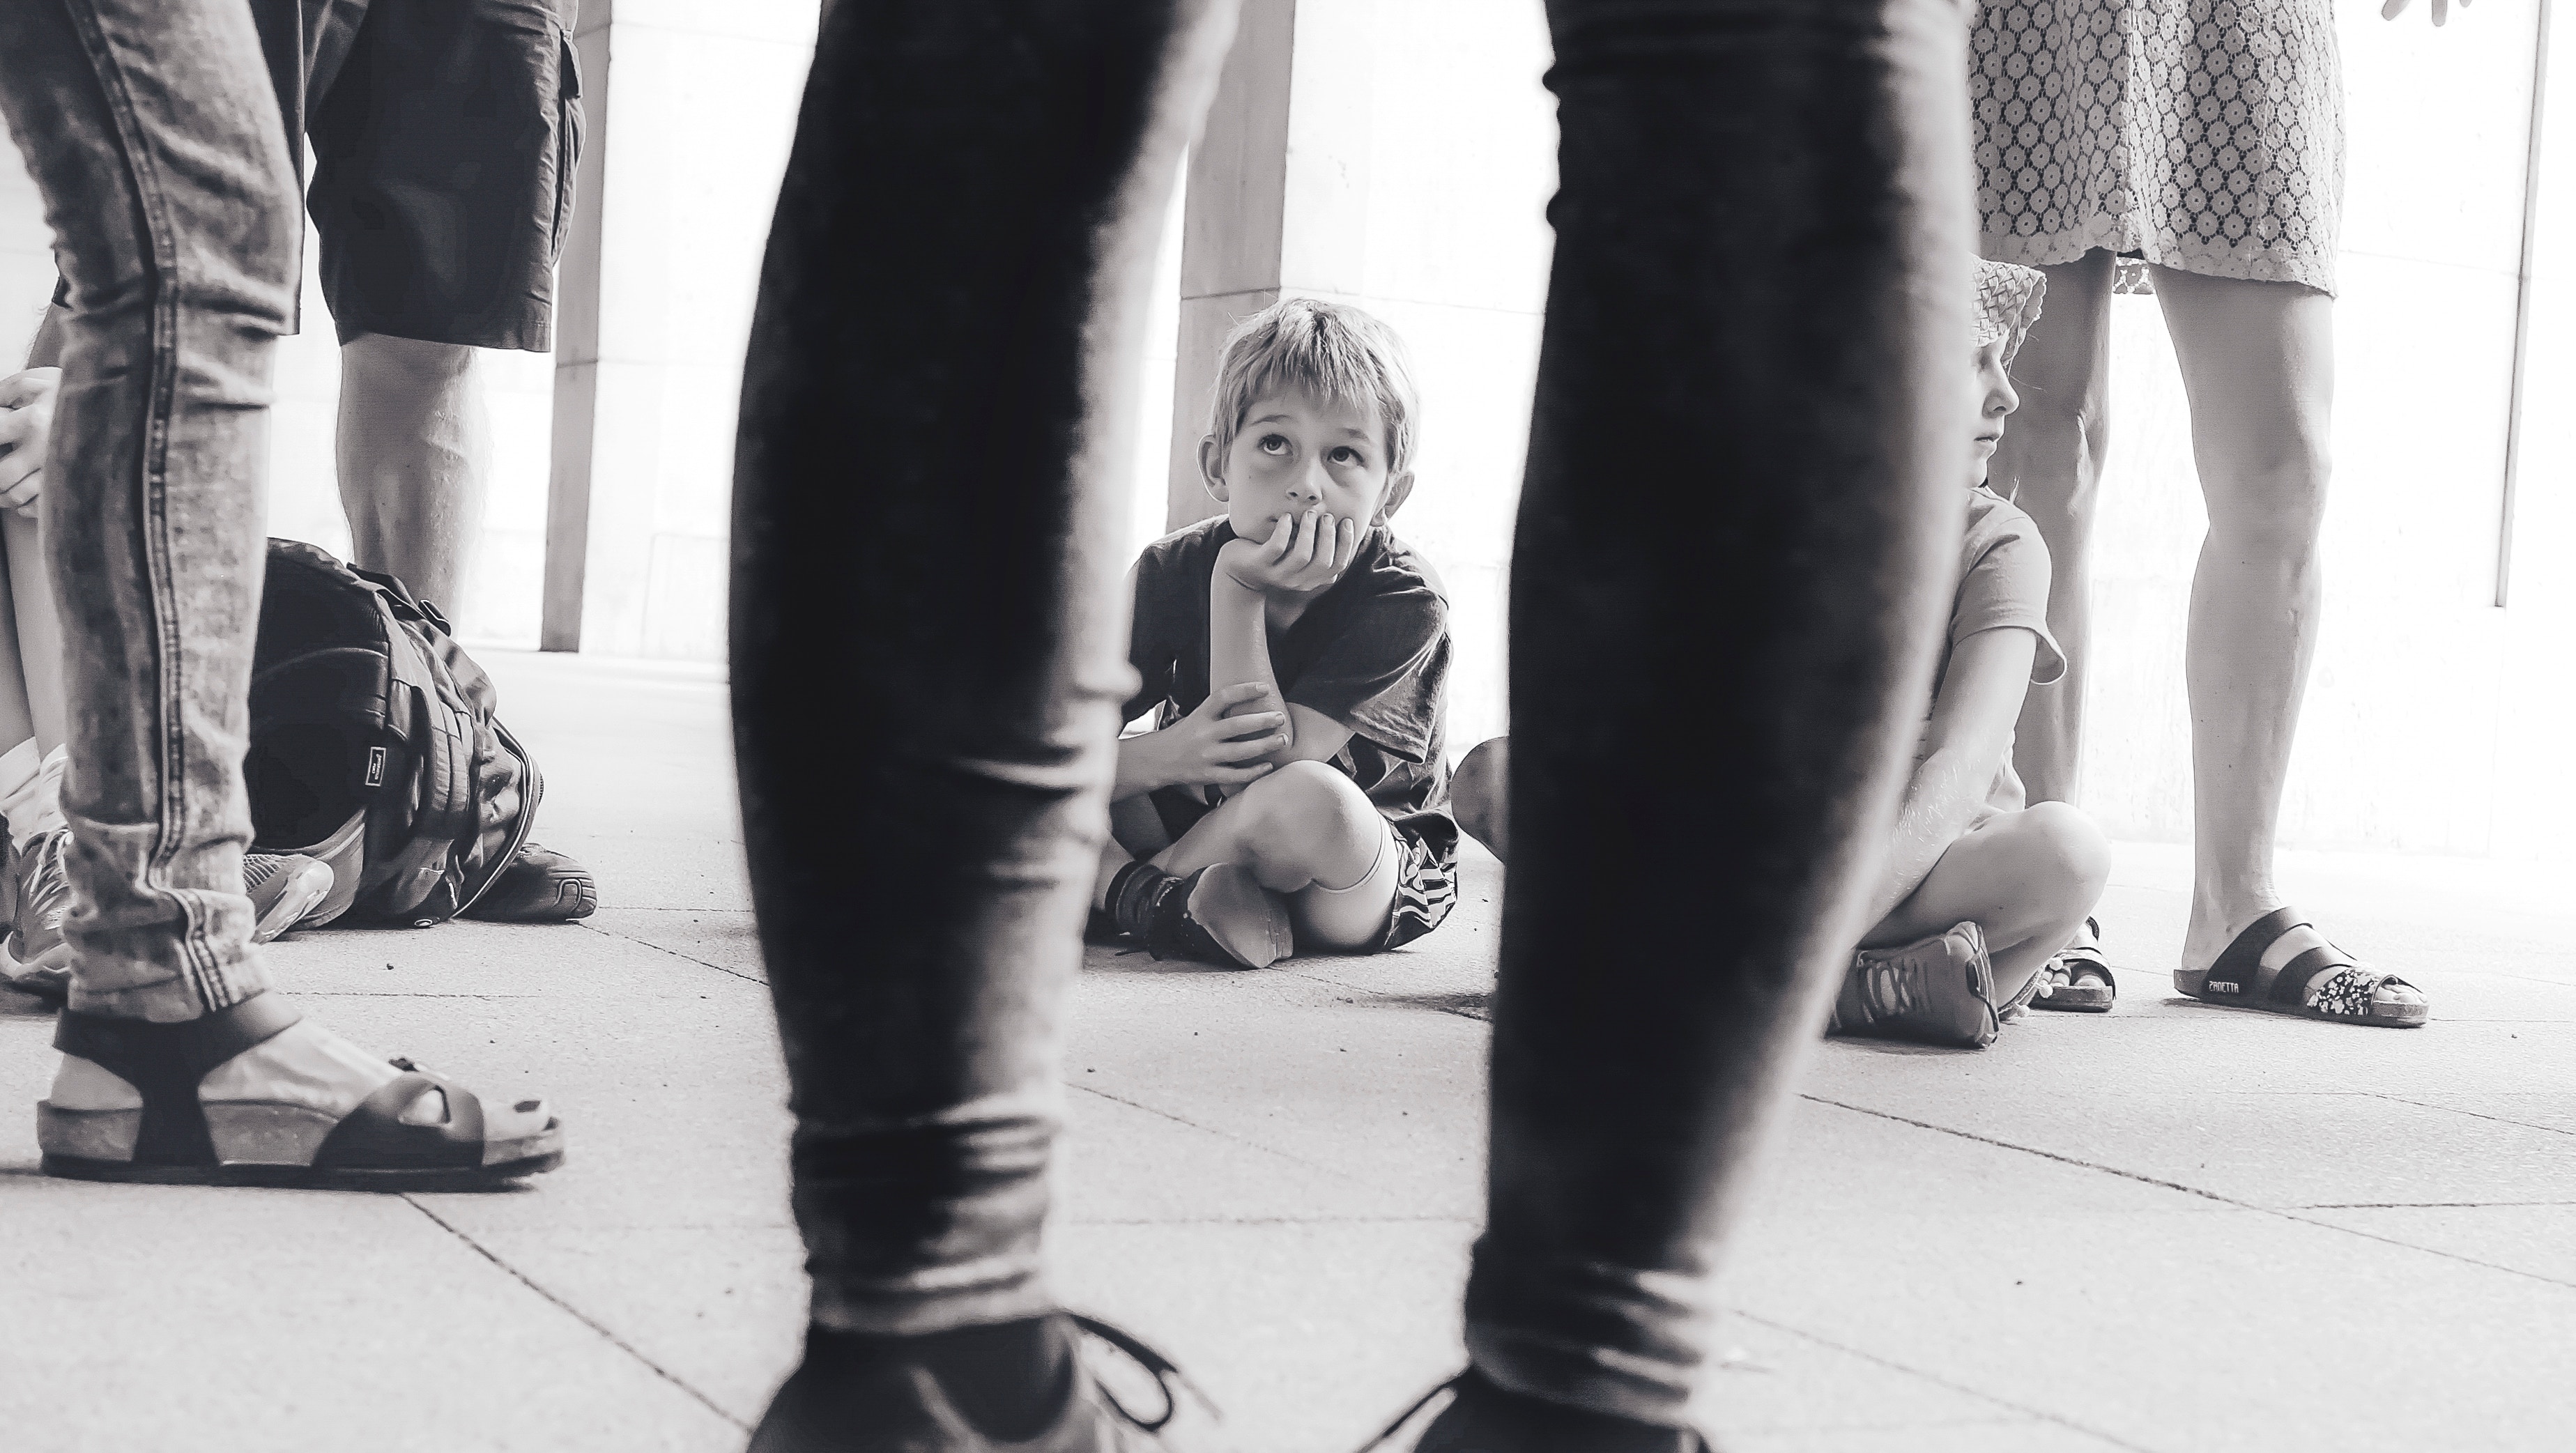 grayscale photography of boy sitting on the floor watching the person in front of him